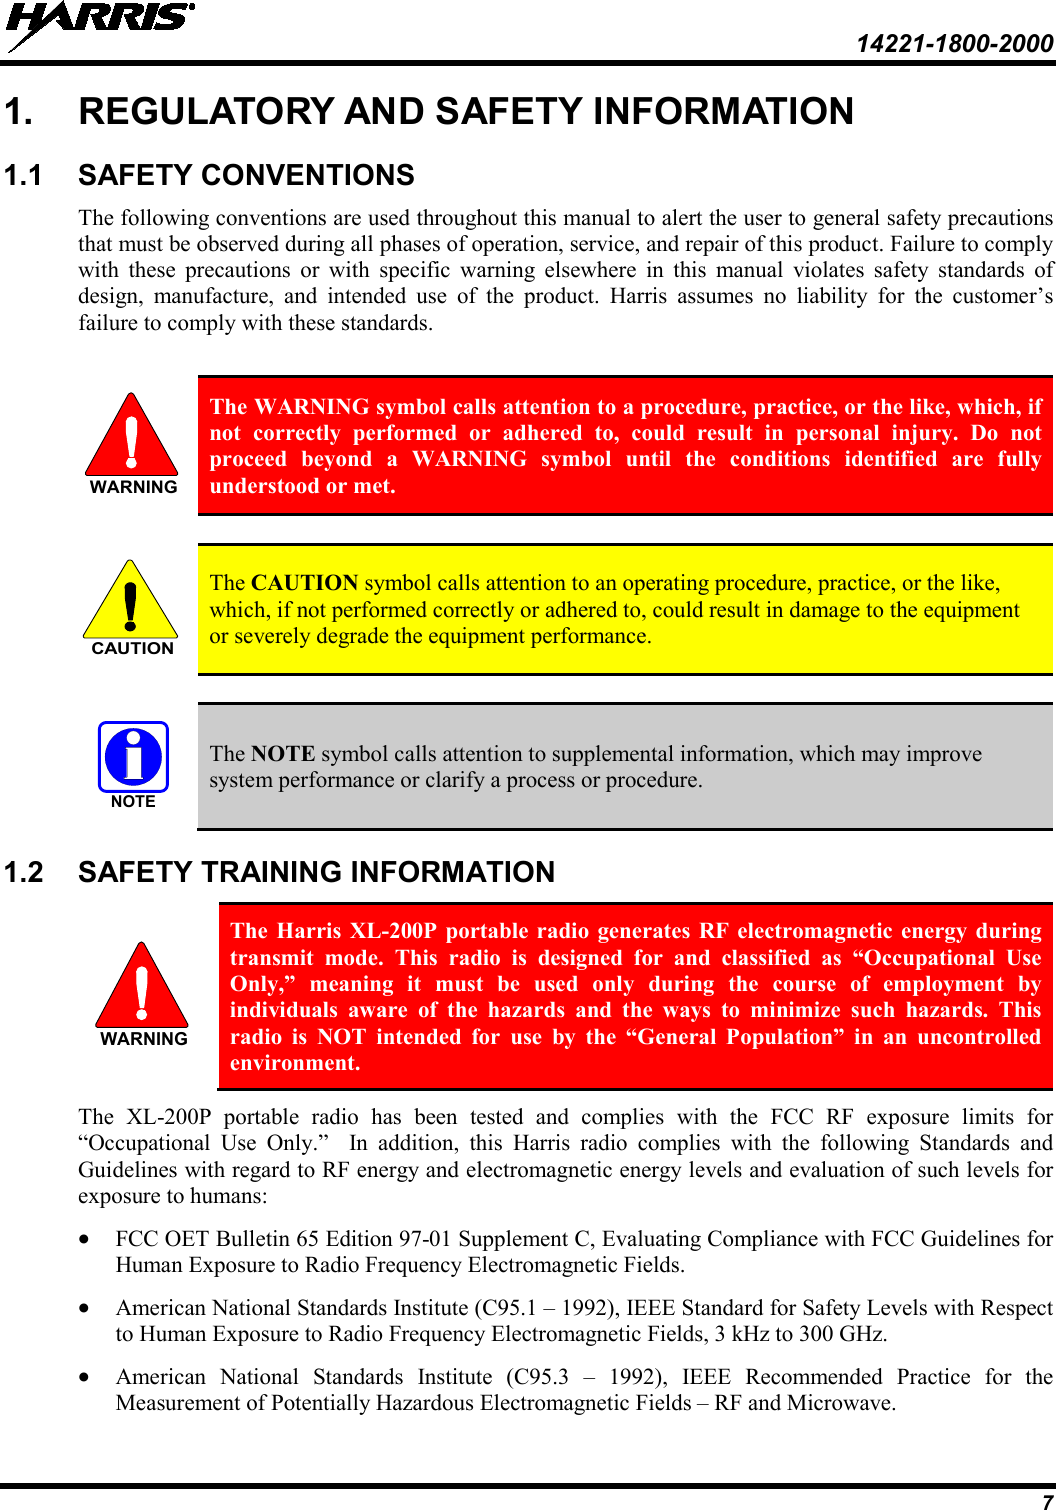  14221-1800-2000 7 1. REGULATORY AND SAFETY INFORMATION 1.1 SAFETY CONVENTIONS The following conventions are used throughout this manual to alert the user to general safety precautions that must be observed during all phases of operation, service, and repair of this product. Failure to comply with these precautions or with specific warning elsewhere in this manual violates safety standards of design, manufacture, and intended use of the product. Harris assumes no liability for the customer’s failure to comply with these standards.   The WARNING symbol calls attention to a procedure, practice, or the like, which, if not correctly performed or adhered to, could result in personal injury. Do not proceed beyond a WARNING symbol until the conditions identified are fully understood or met.    The CAUTION symbol calls attention to an operating procedure, practice, or the like, which, if not performed correctly or adhered to, could result in damage to the equipment or severely degrade the equipment performance.    The NOTE symbol calls attention to supplemental information, which may improve system performance or clarify a process or procedure. 1.2 SAFETY TRAINING INFORMATION  The Harris XL-200P portable radio generates RF electromagnetic energy during transmit mode. This radio is designed for and classified as “Occupational Use Only,” meaning it must be used only during the course of employment by individuals aware of the hazards and the ways to minimize such hazards. This radio is NOT intended for use by the “General Population” in an uncontrolled environment. The XL-200P portable radio has been tested and complies with the FCC RF exposure limits for “Occupational Use Only.”  In addition, this Harris radio complies with the following Standards and Guidelines with regard to RF energy and electromagnetic energy levels and evaluation of such levels for exposure to humans: • FCC OET Bulletin 65 Edition 97-01 Supplement C, Evaluating Compliance with FCC Guidelines for Human Exposure to Radio Frequency Electromagnetic Fields. • American National Standards Institute (C95.1 – 1992), IEEE Standard for Safety Levels with Respect to Human Exposure to Radio Frequency Electromagnetic Fields, 3 kHz to 300 GHz. • American National Standards Institute (C95.3 –  1992), IEEE Recommended Practice for the Measurement of Potentially Hazardous Electromagnetic Fields – RF and Microwave. WARNINGCAUTIONNOTEWARNING